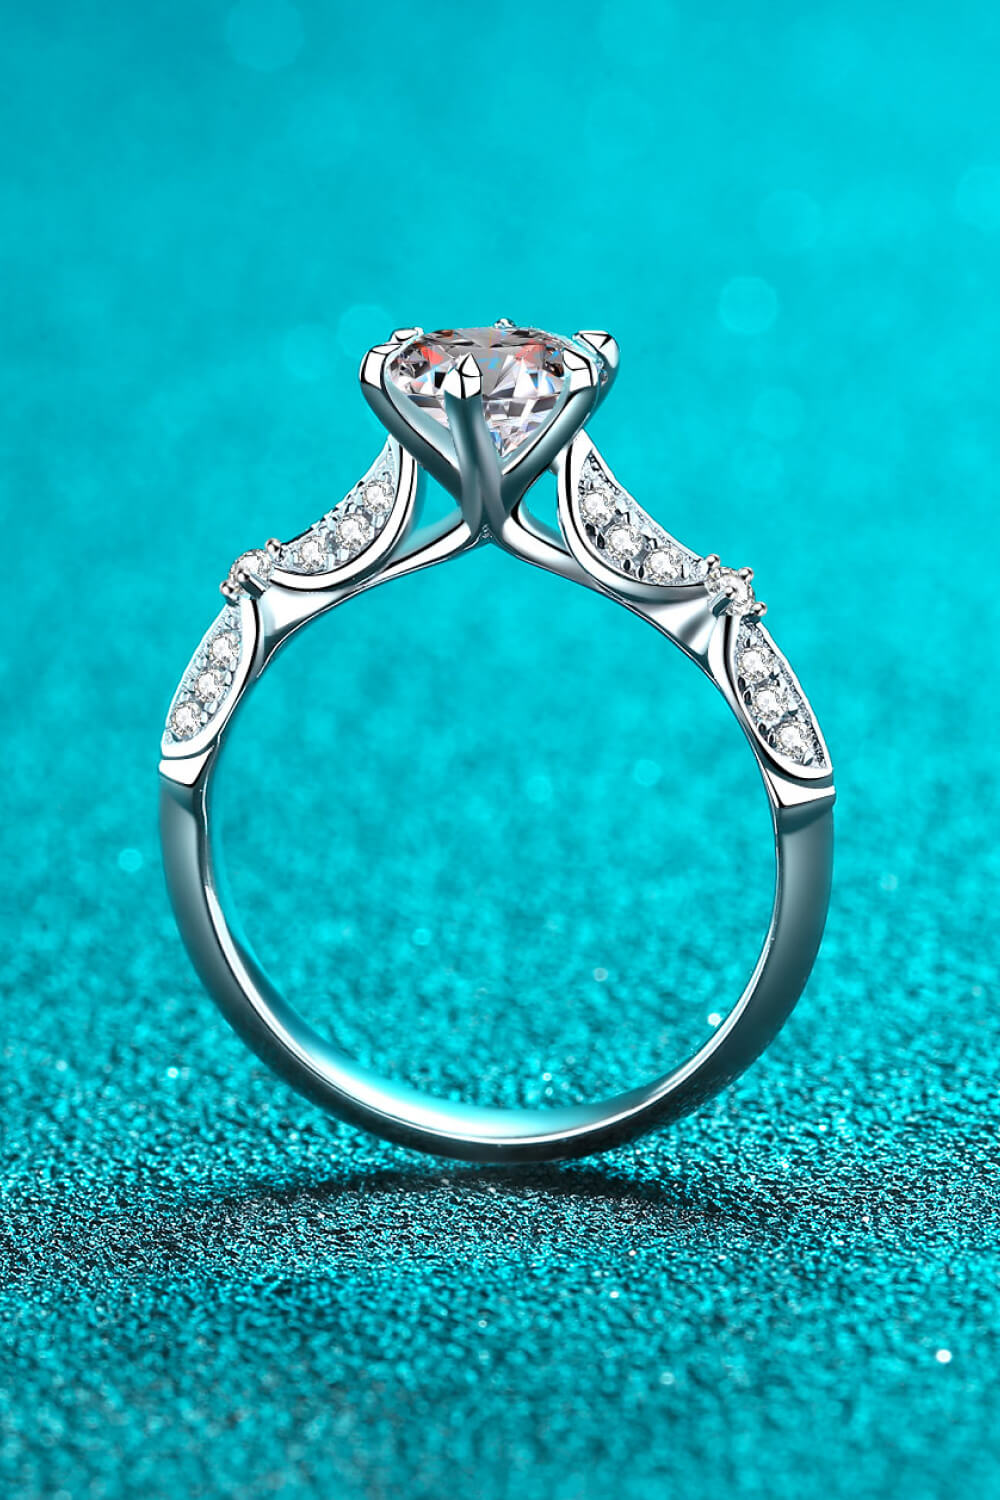 Inlaid Moissanite 6-Prong Ring in 925 Sterling Silver